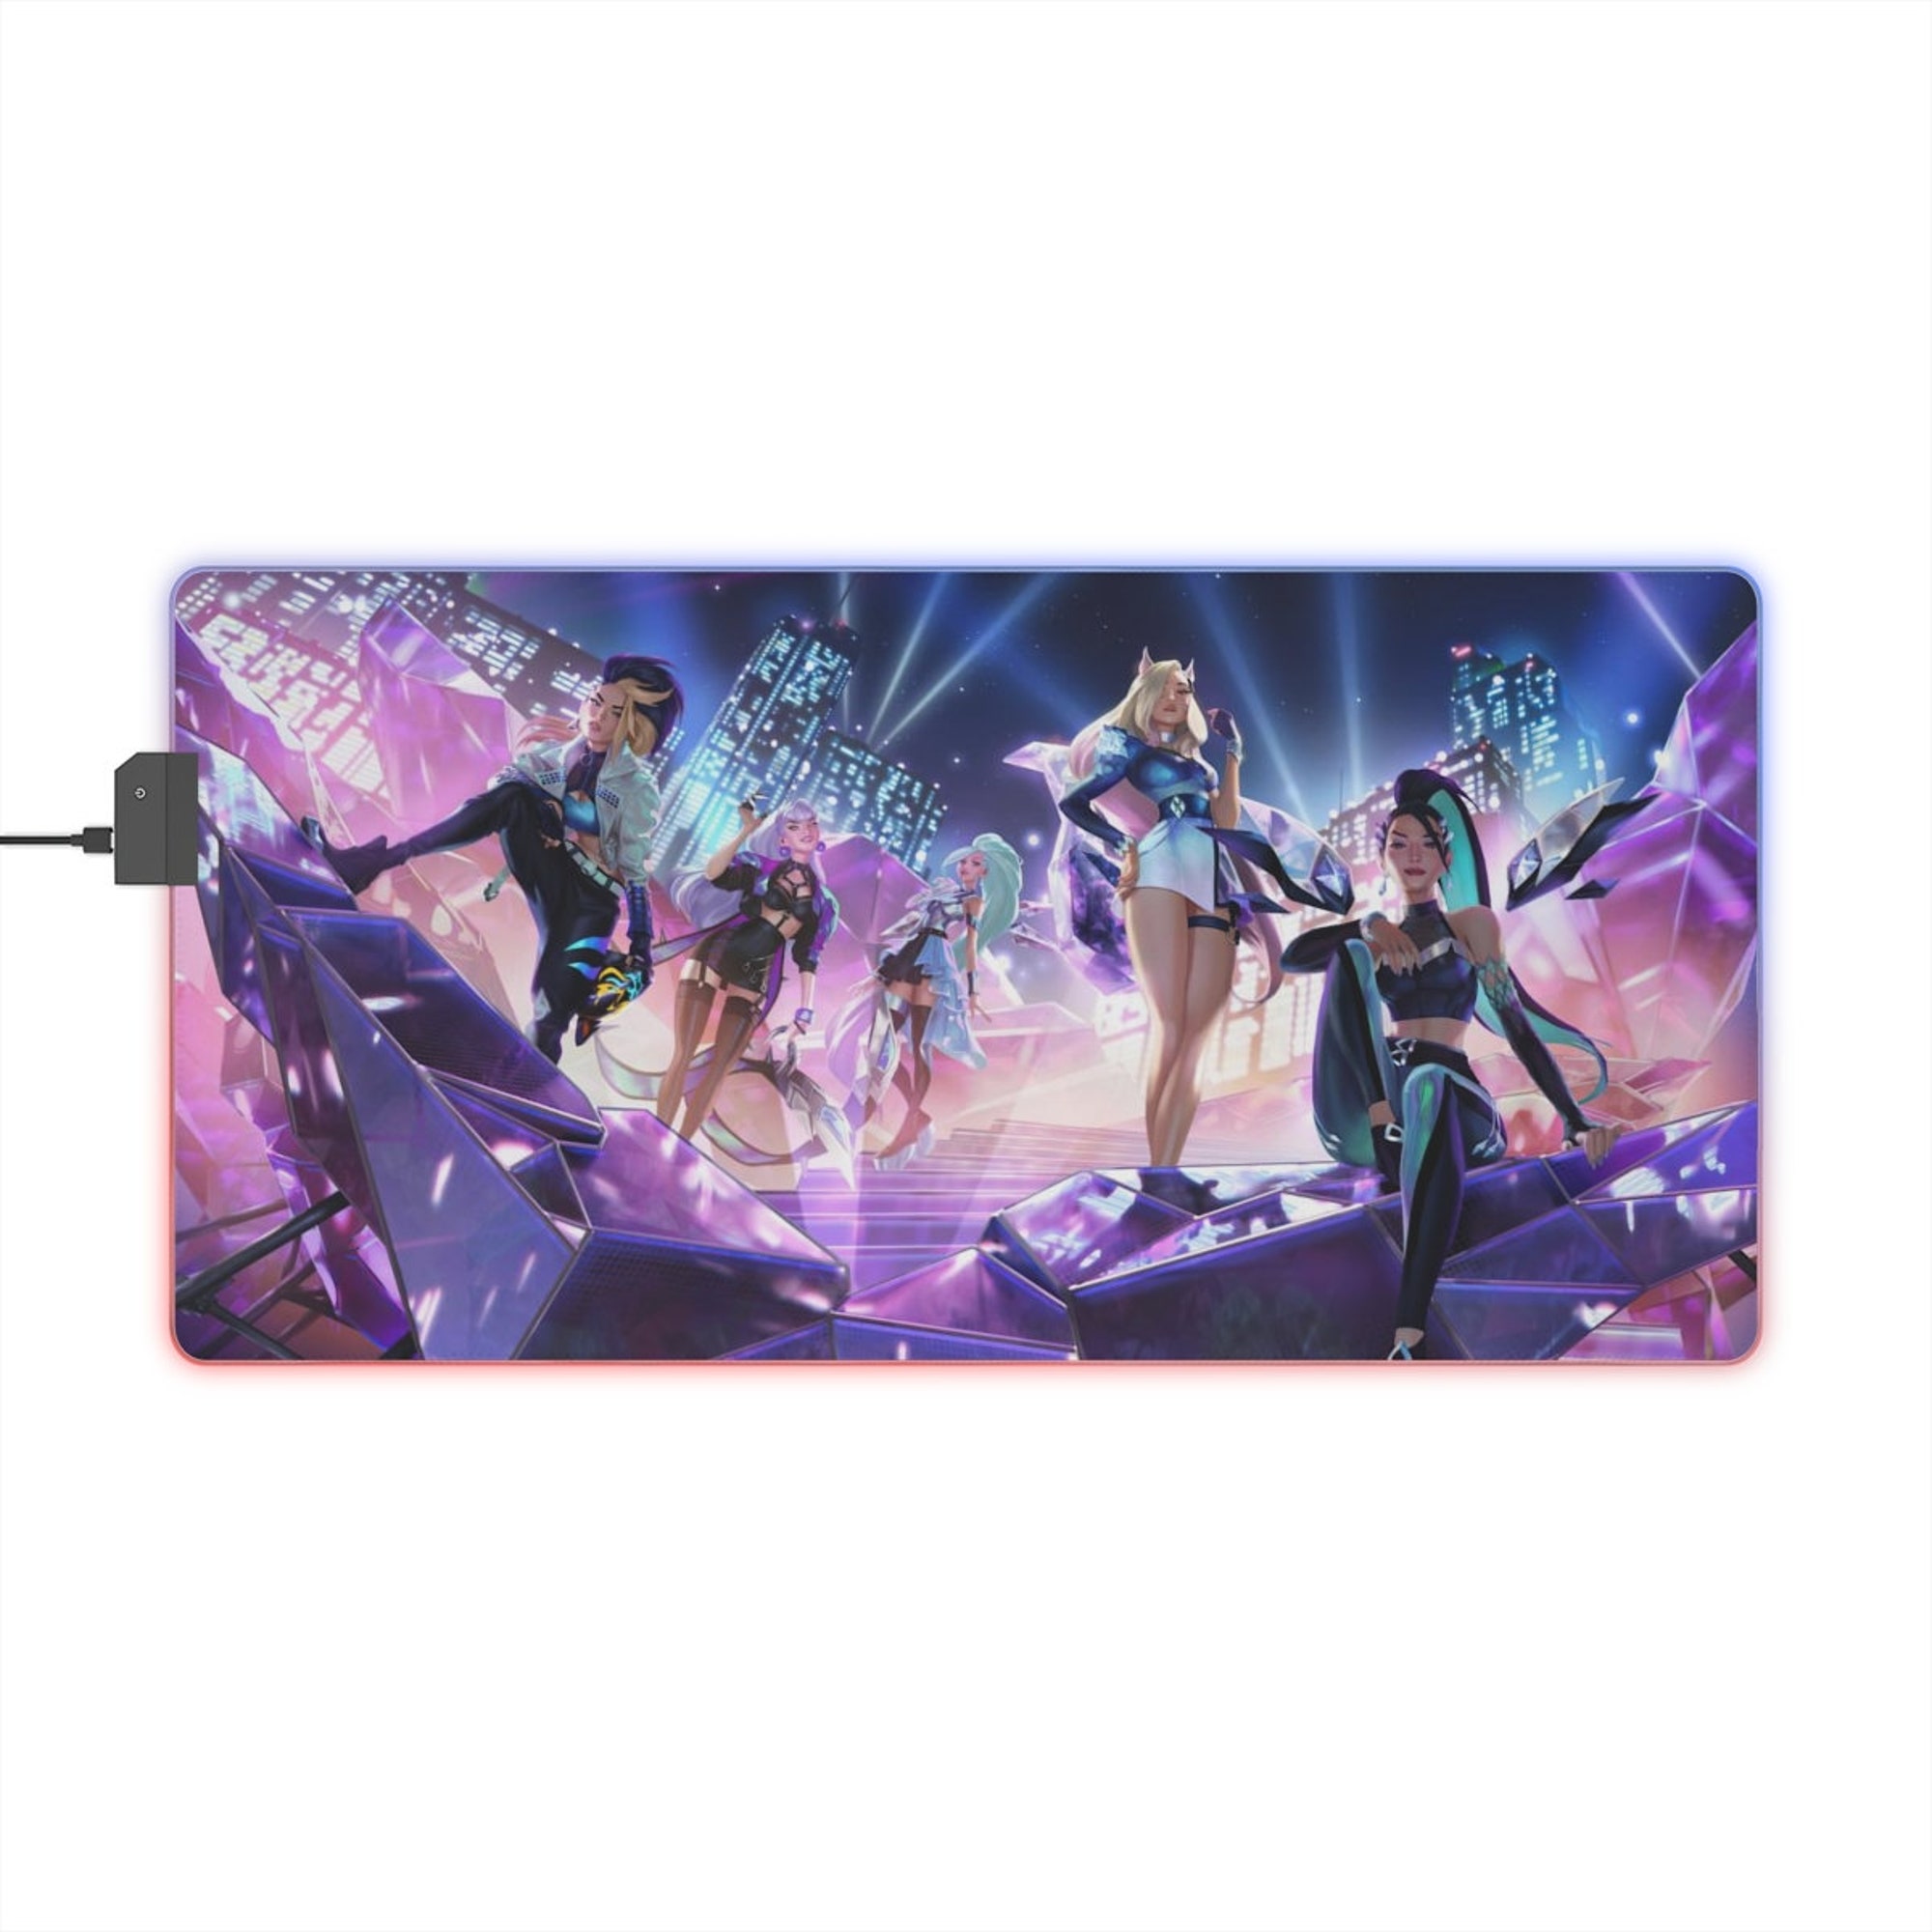 Discover League Of Legends LED Gaming Mouse Pad